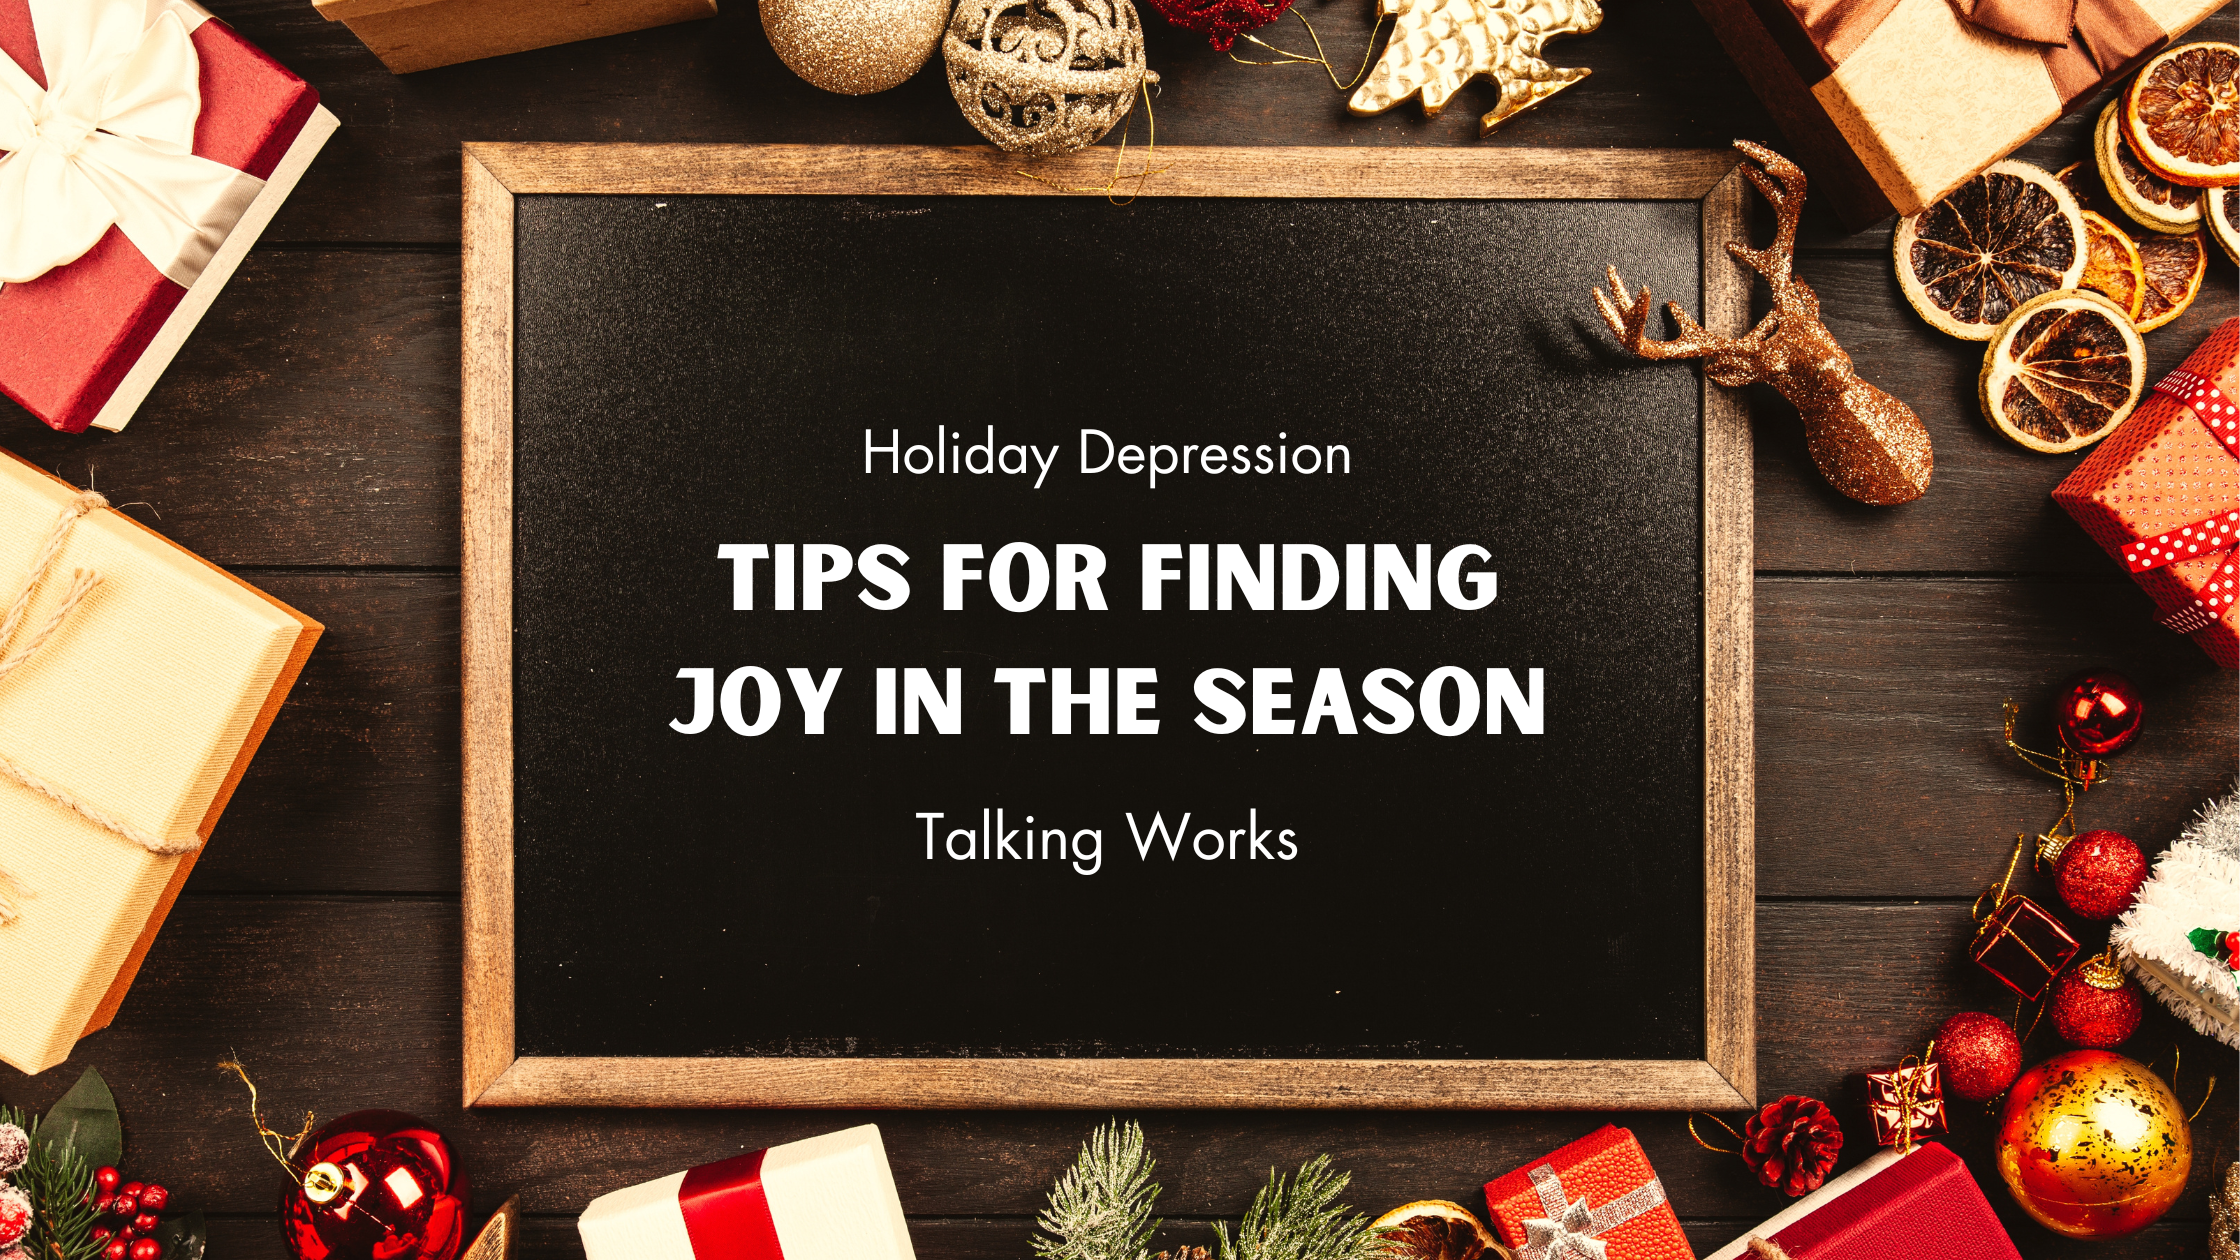 Holiday depression: Tips for finding joy in the season